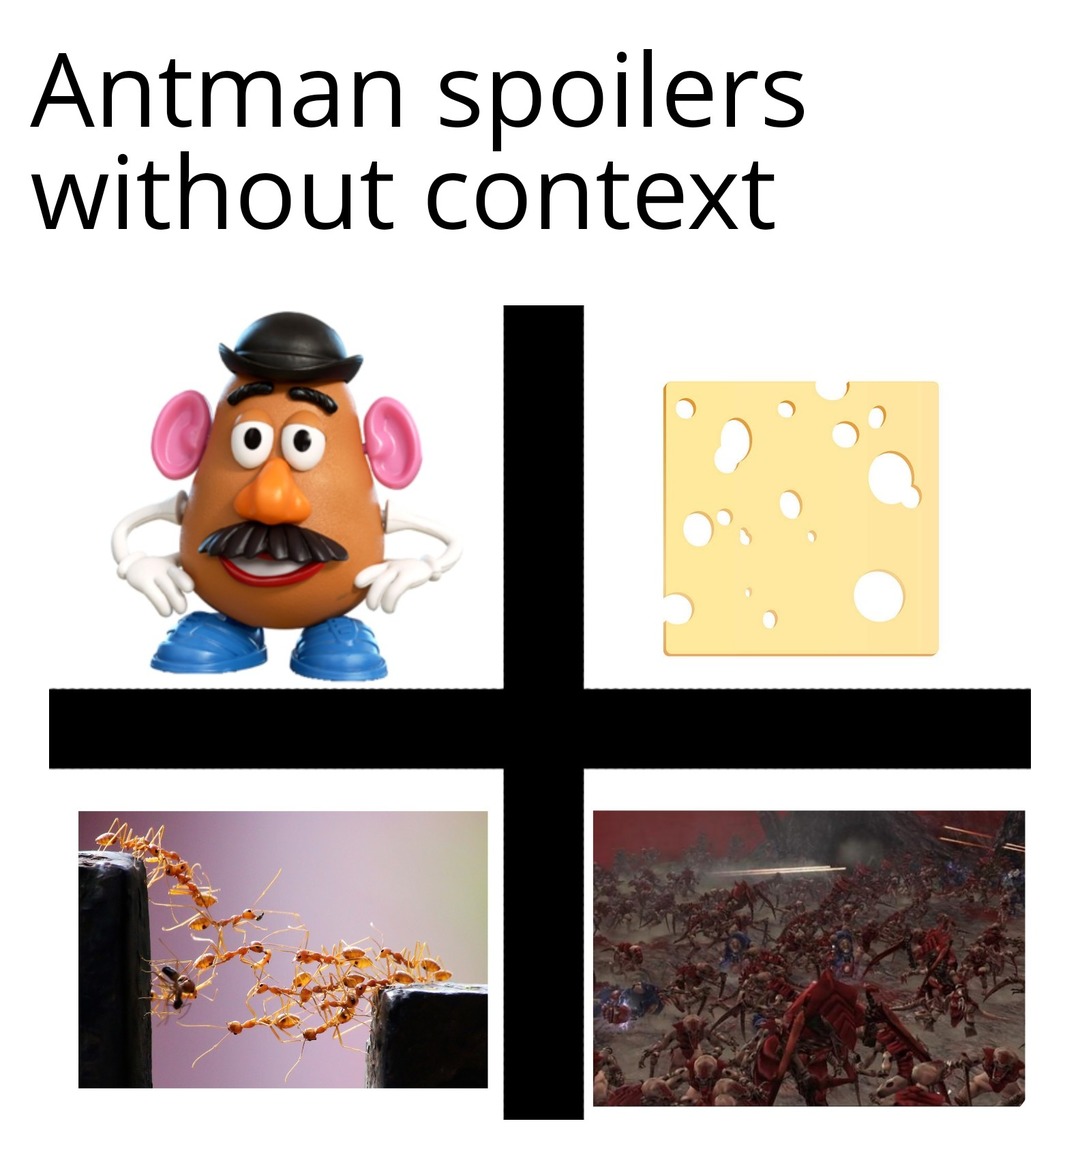 Antman spoilers without context - meme